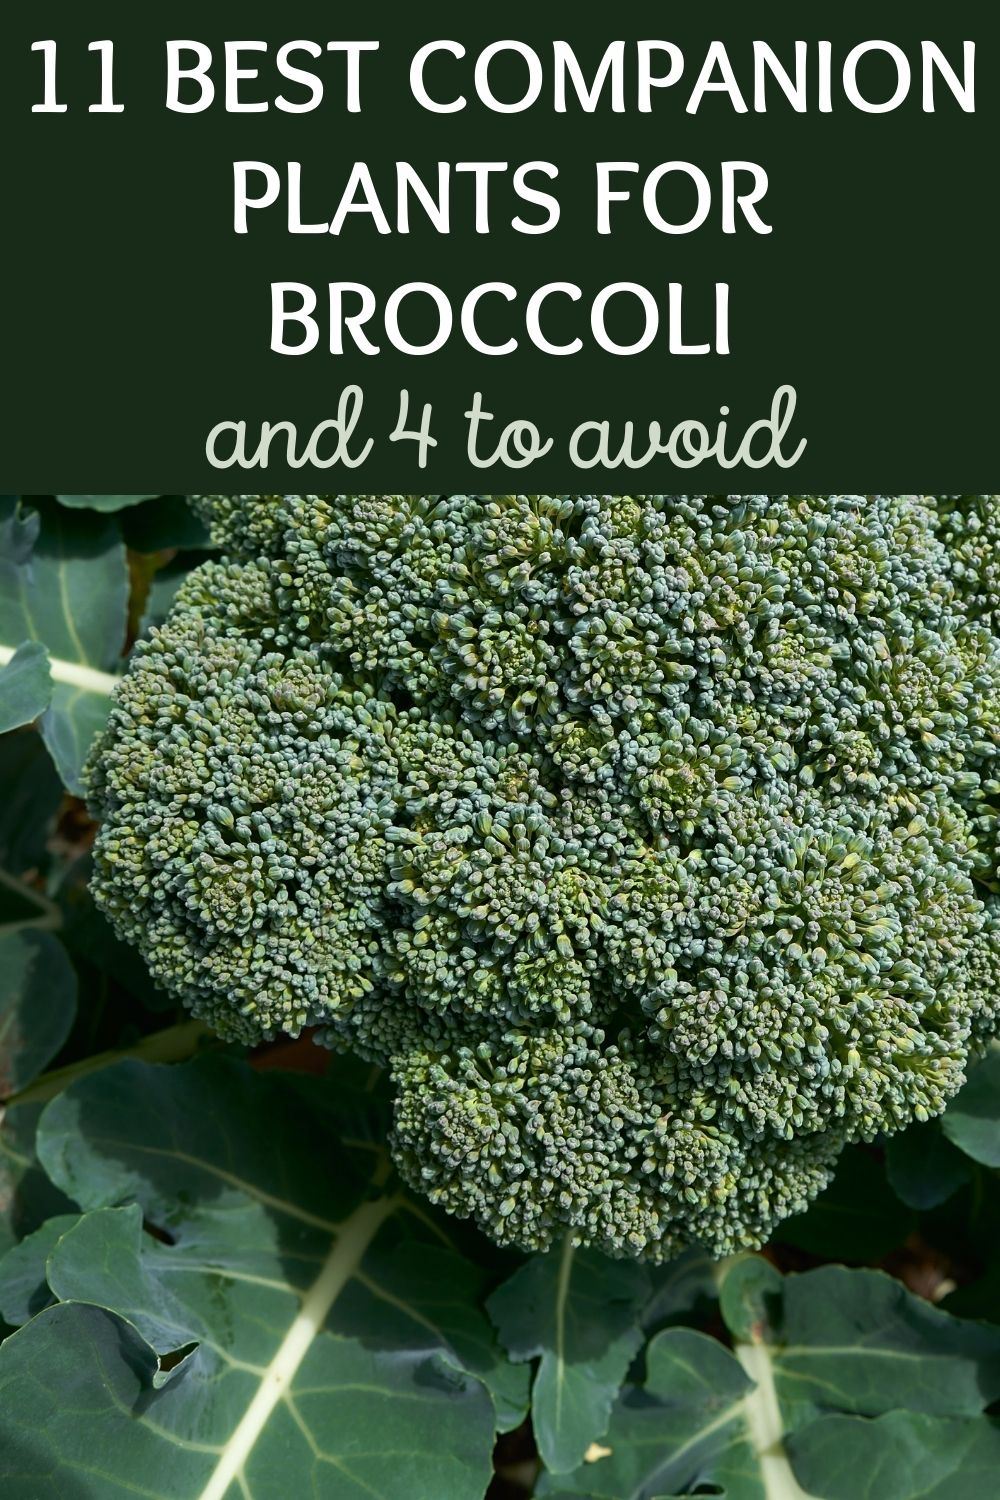 11 best companion plants for broccoli and 4 to avoid